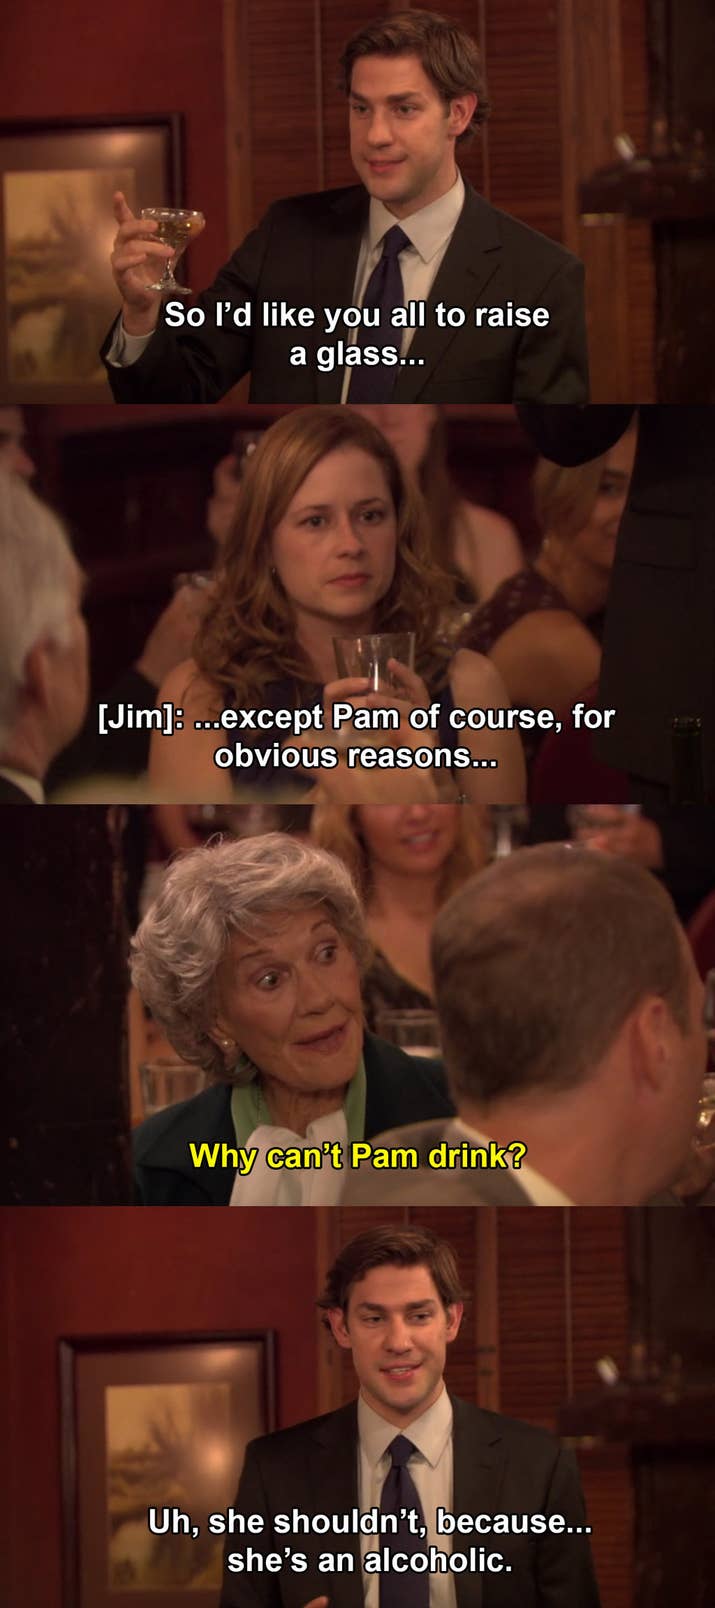 The Episode: "Niagara, Part 1" (Season 6, Episode 4)Why It Hurts To Watch: There's a big to-do about how Pam's very conservative grandmother is the only one who doesn't know about the pregnancy, so there's that. Then, Michael tries to mitigate the situation by saying that Jim and Pam "made a mistake." Plus, Jim is usually so smooth, so it's tough to watch him flounder.